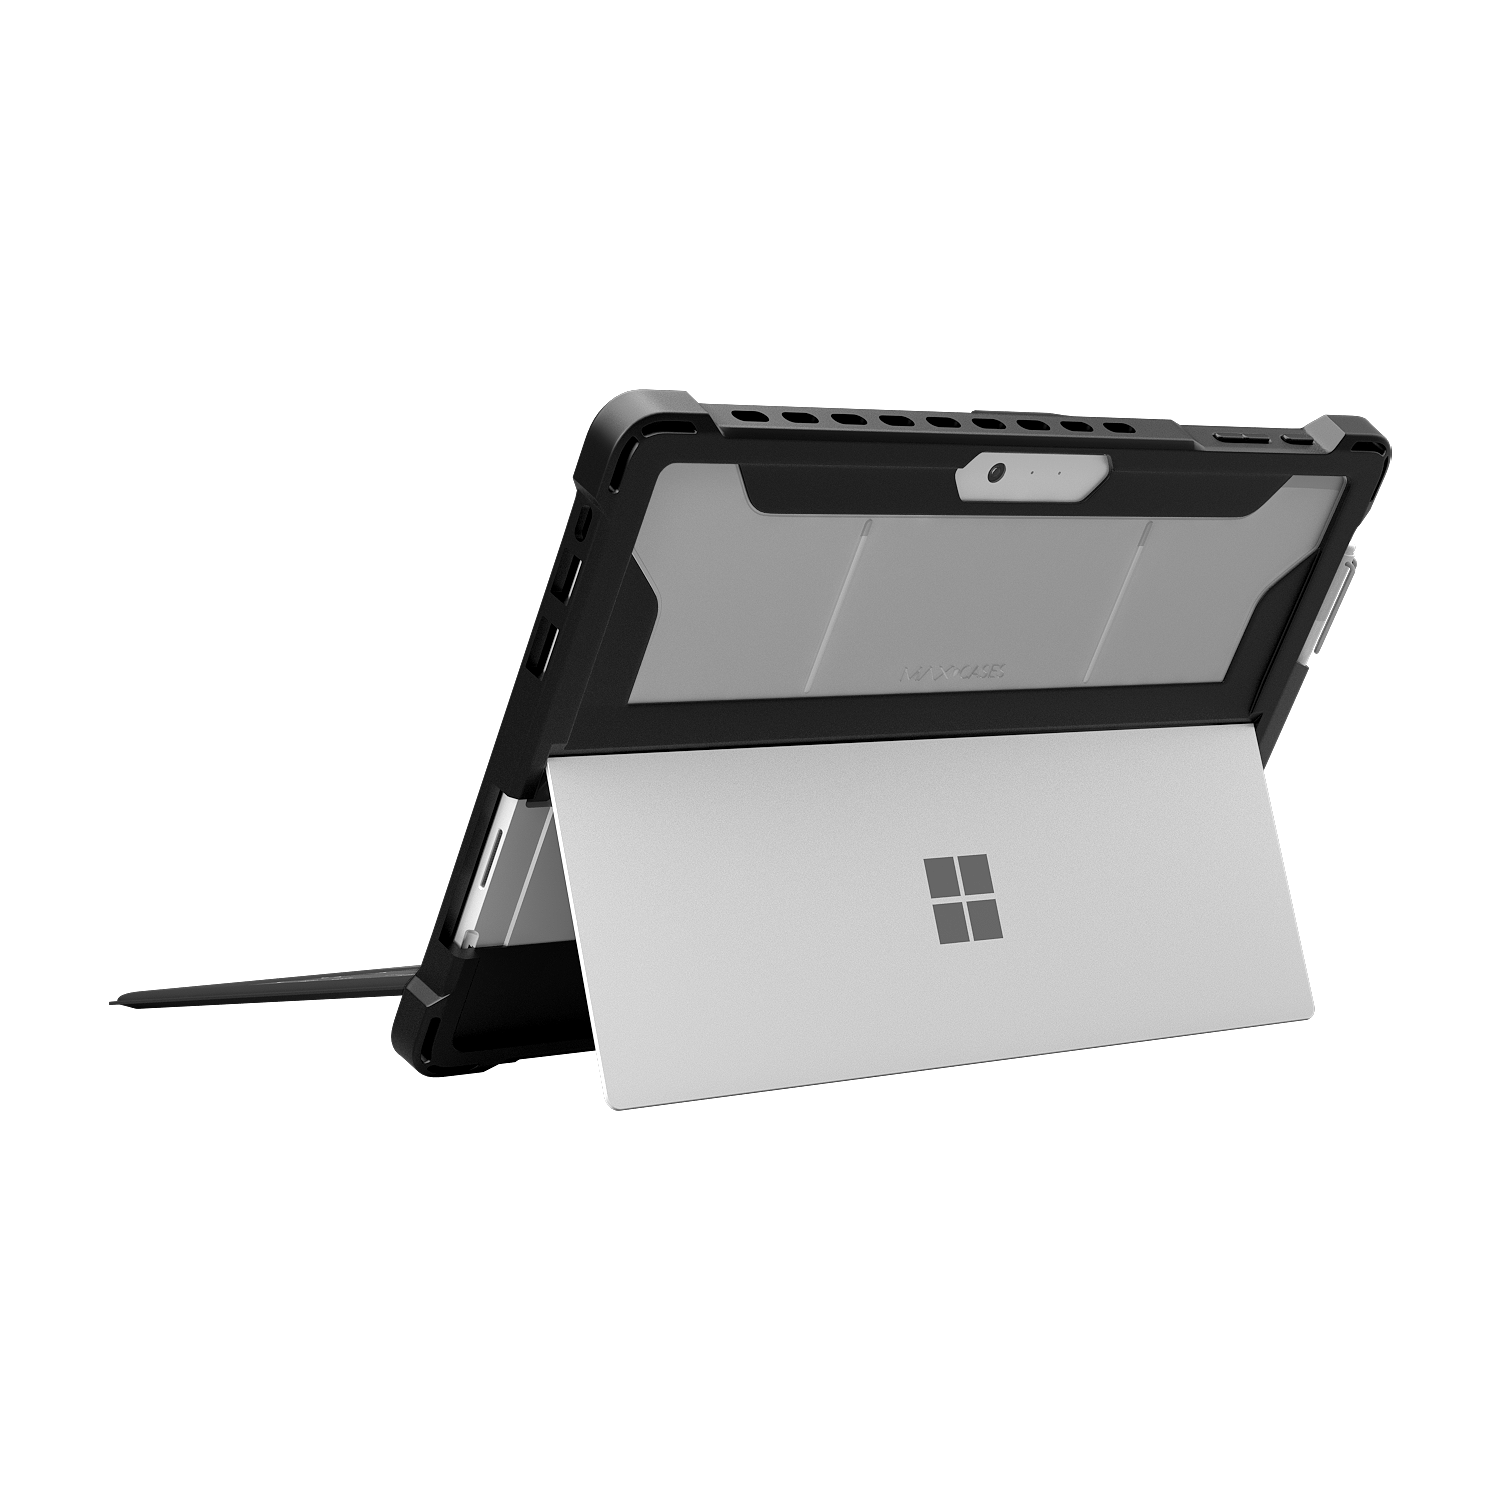 MAXCases Extreme Shell Microsoft Surface Pro 5 / 6 / 7 12.3 Case Black